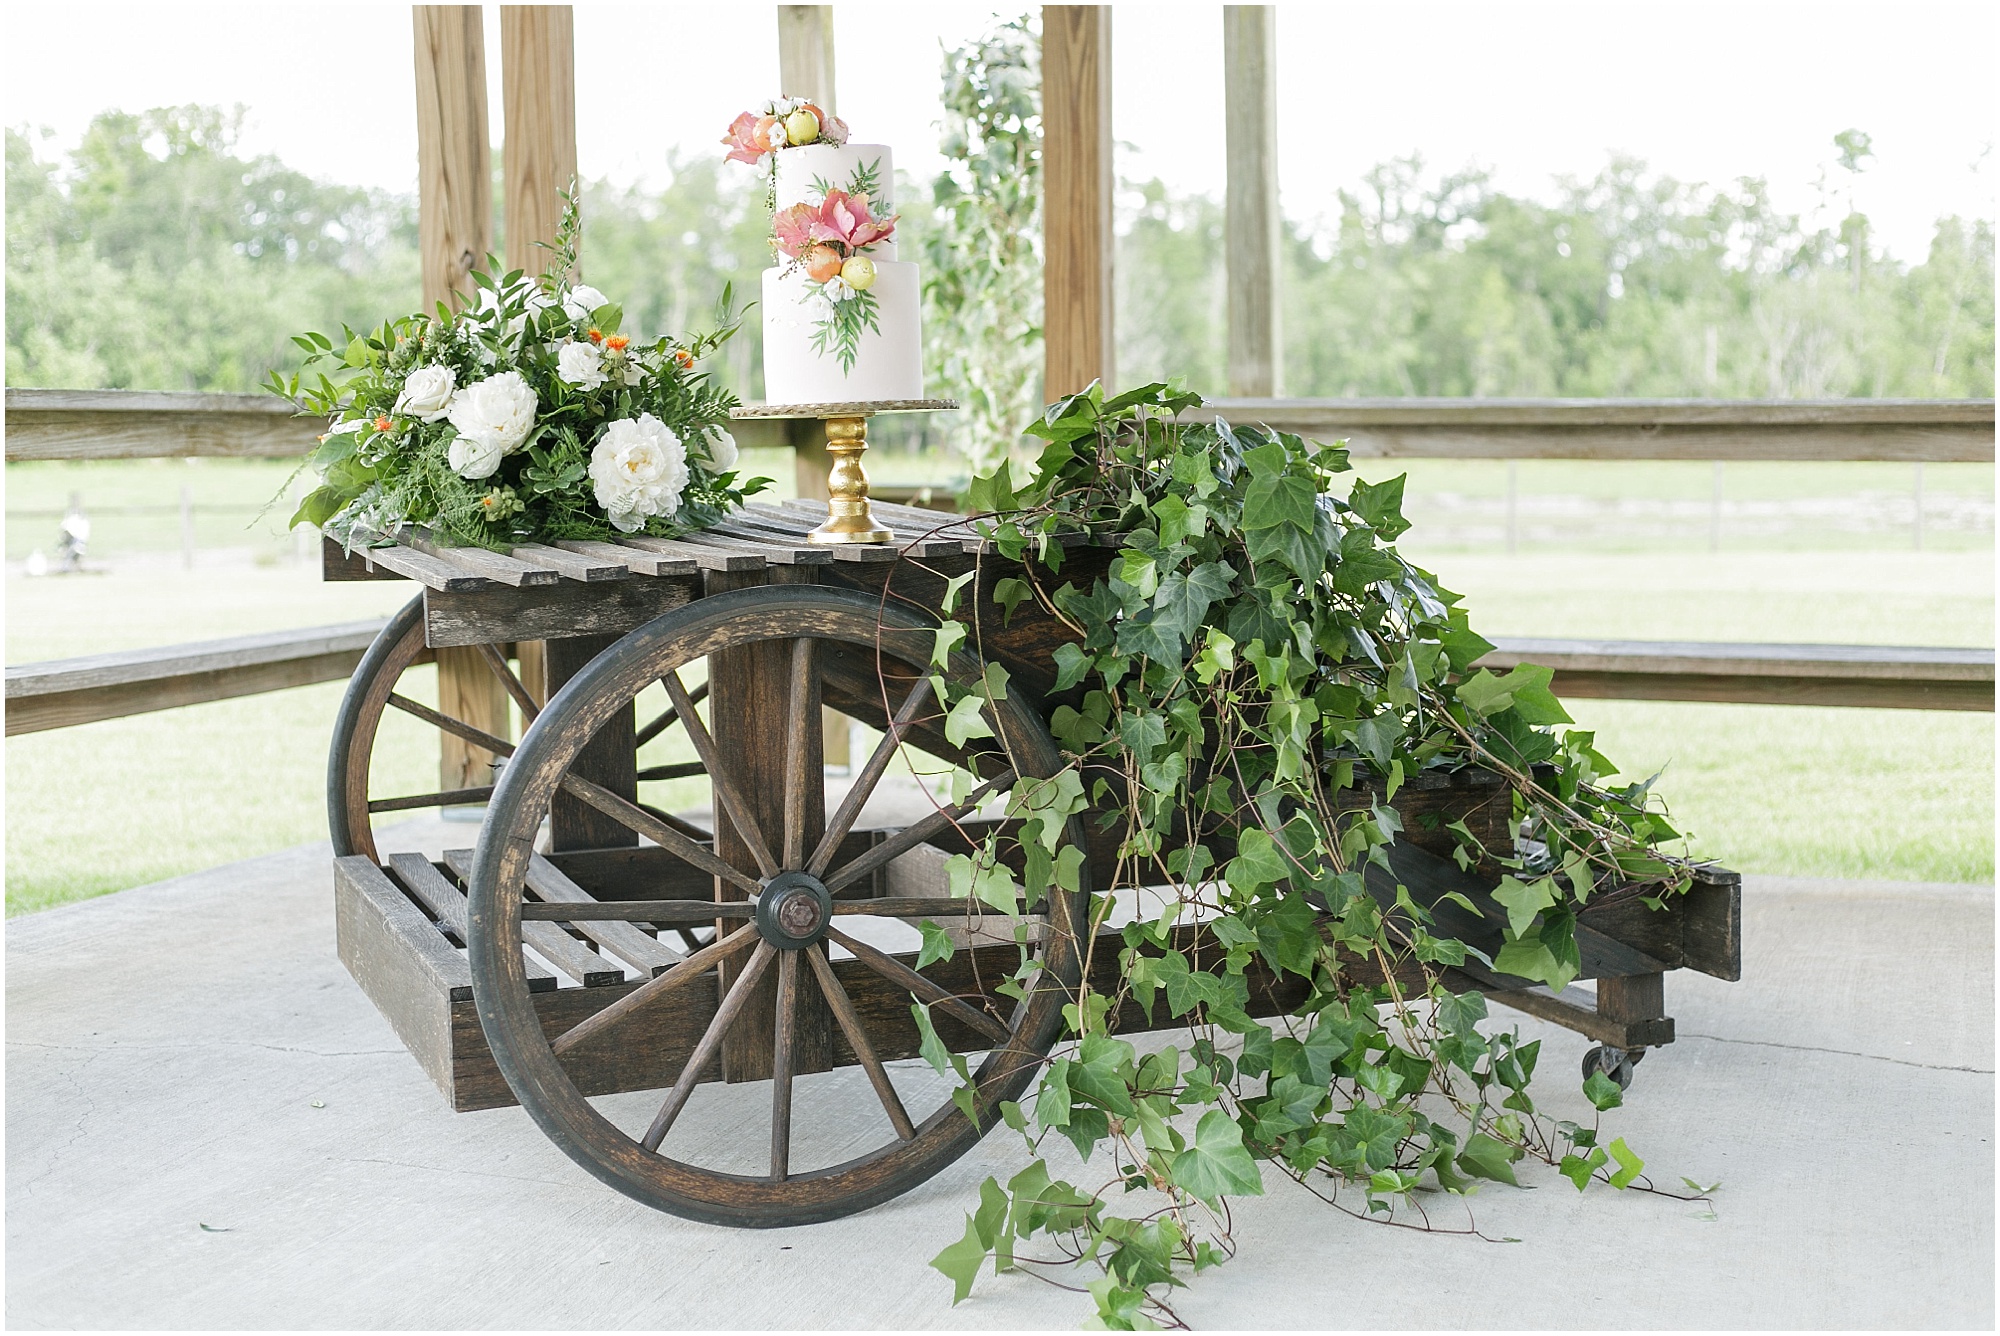 Florida inspired wedding cake sitting on an wooden wagon decorated with greenery. 